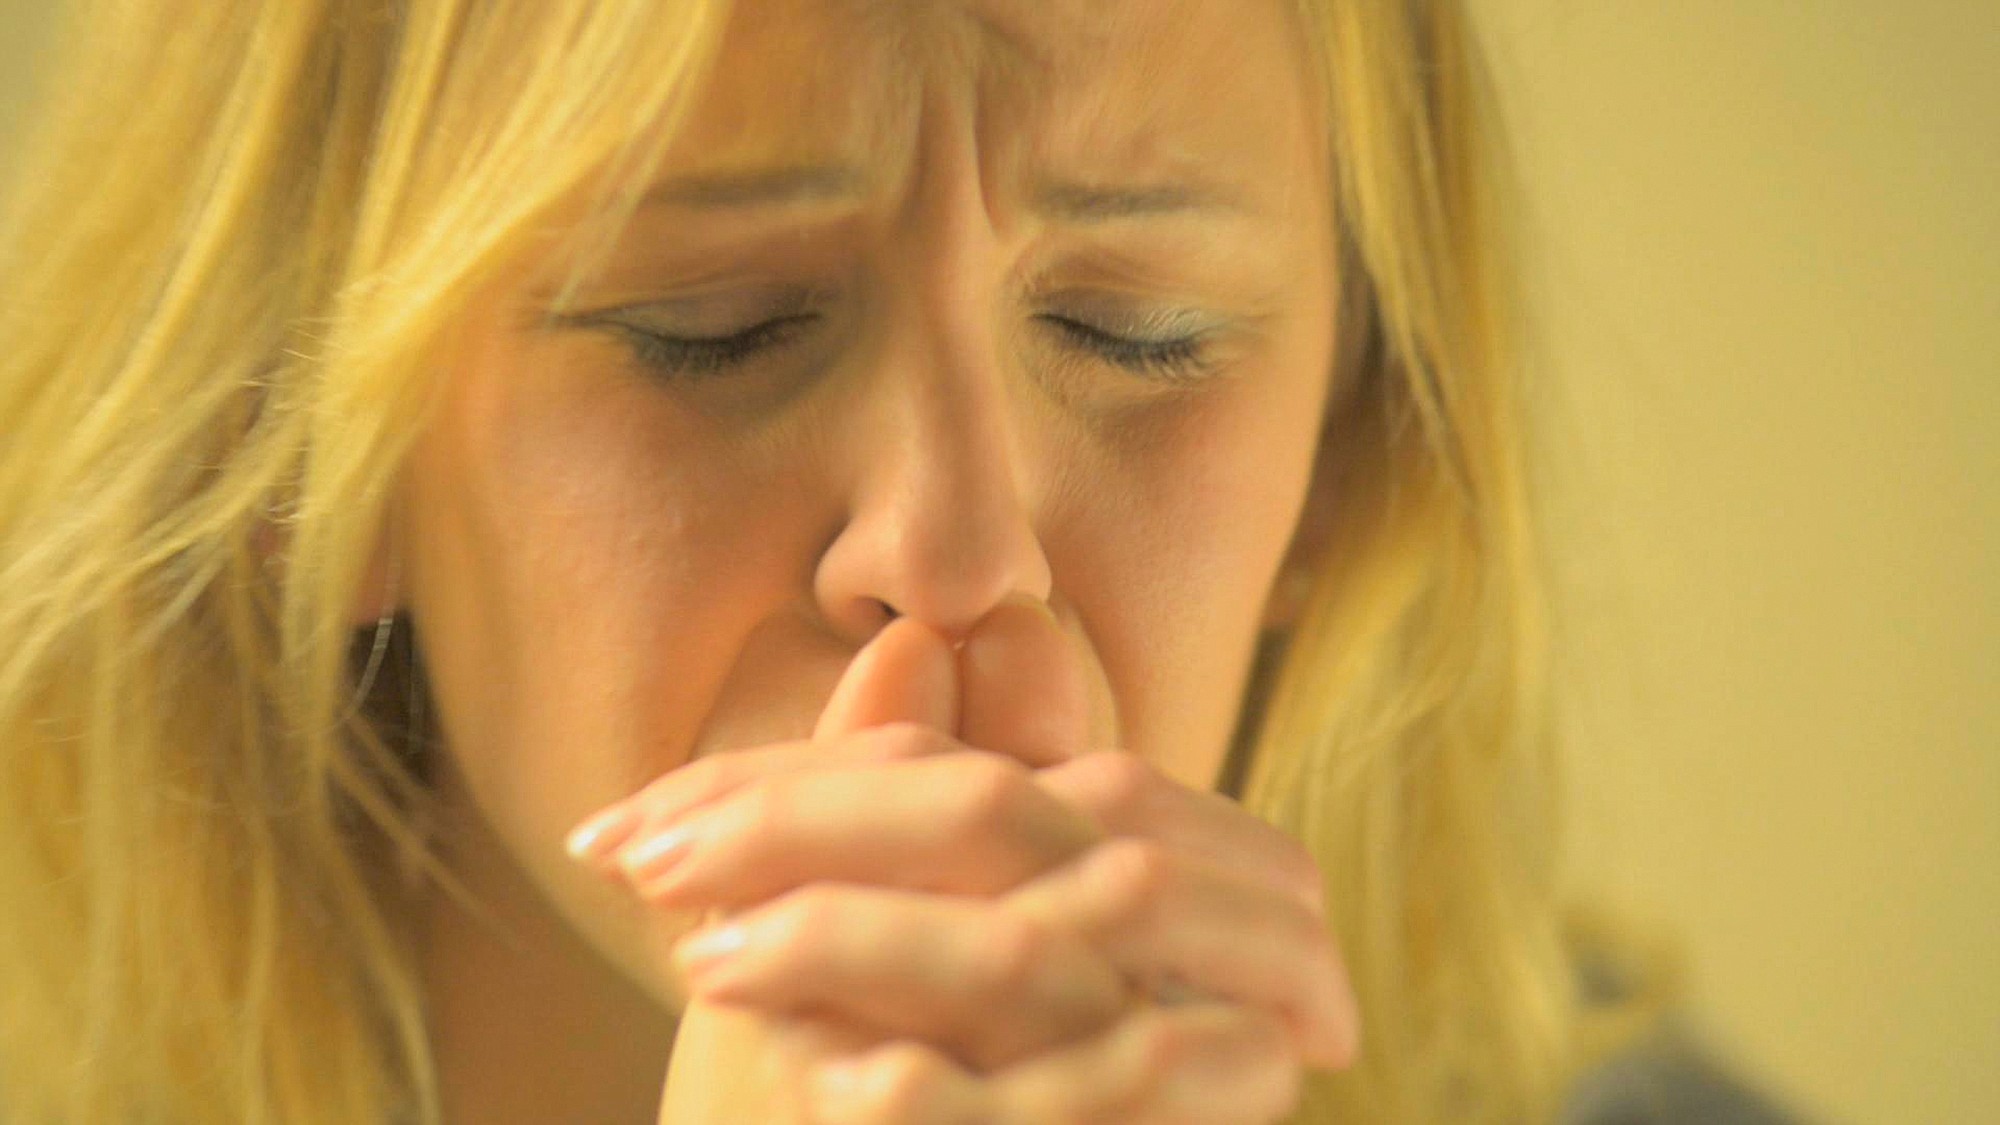 A woman prays for a miracle in TLC's &quot;Answered Prayers.&quot;